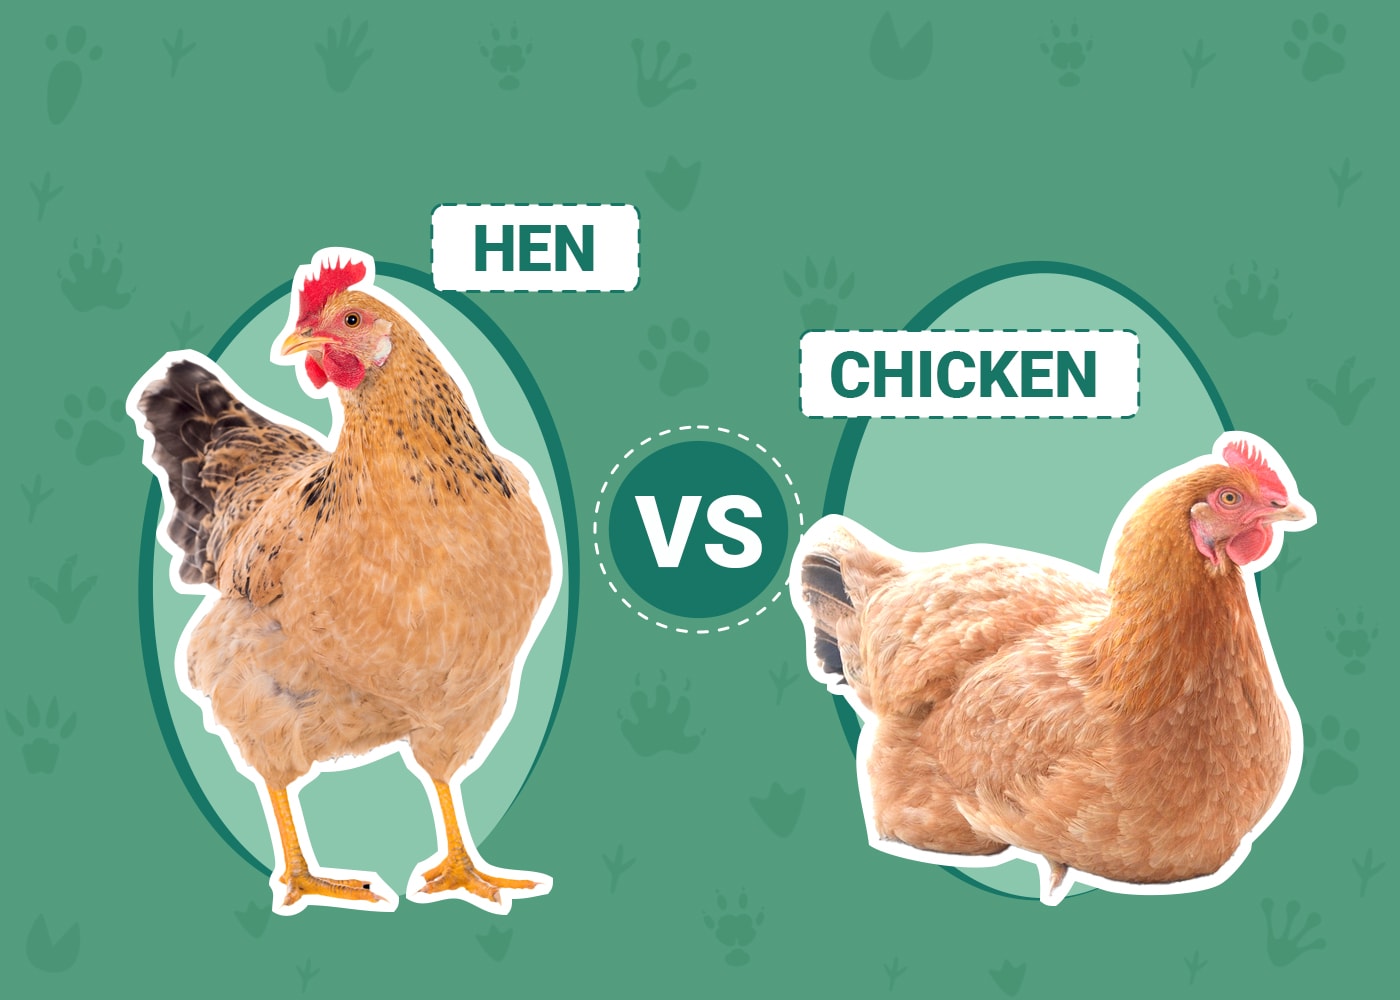 What Is A Hen Anyway? (Hens Vs Chickens) - Mranimal Farm